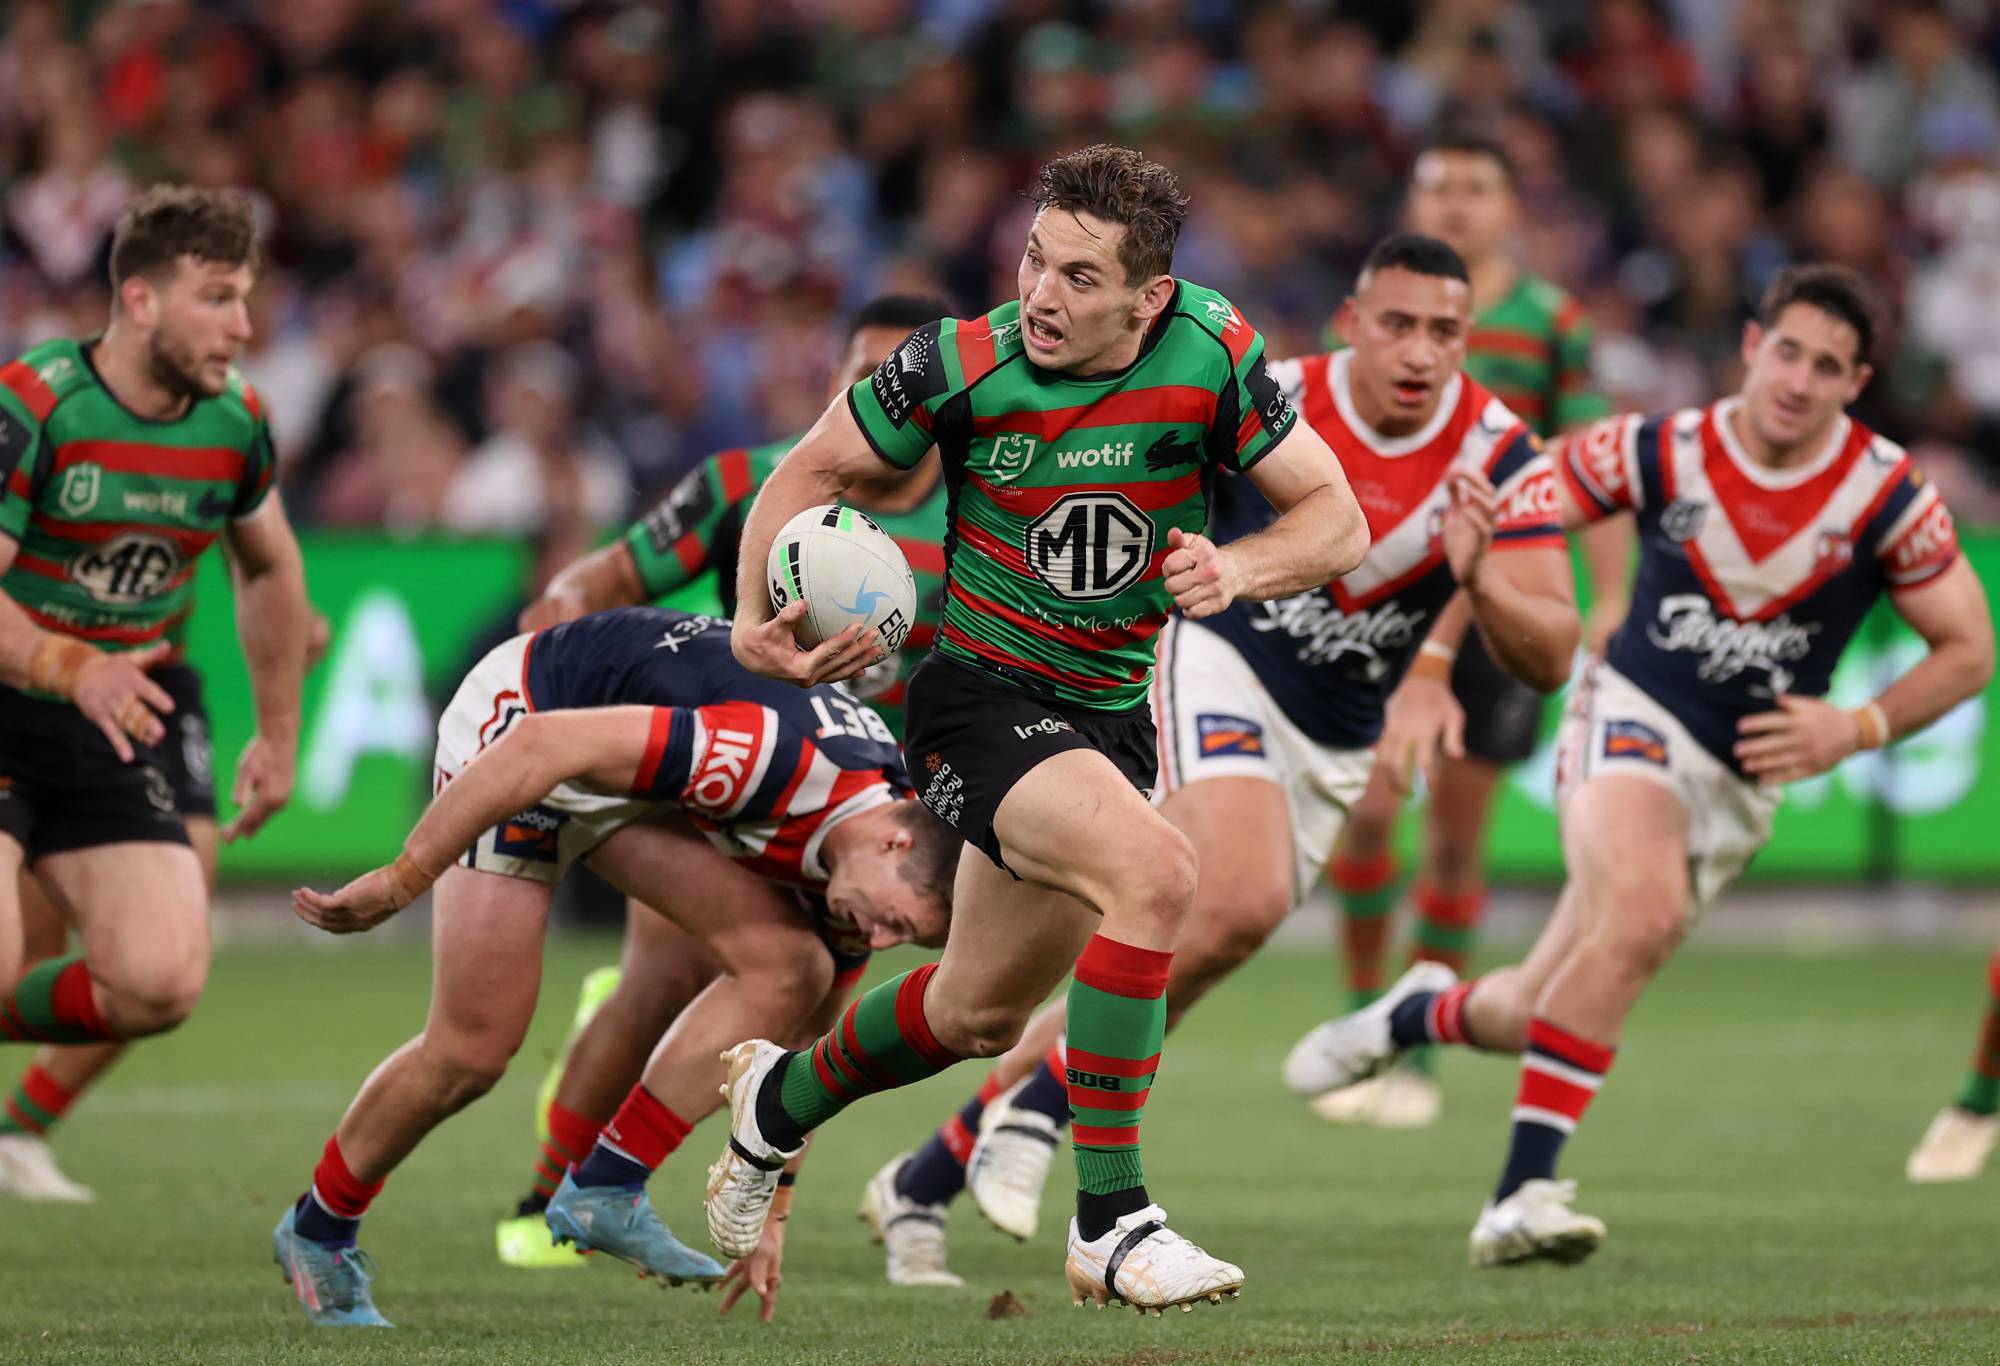 SYDNEY, AUSTRALIA - SEPTEMBER 11: Cameron Murray of the Rabbitohs makes a break during the NRL Elimination Final match between the Sydney Roosters and the South Sydney Rabbitohs at Allianz Stadium on September 11, 2022 in Sydney, Australia. (Photo by Mark Kolbe/Getty Images)